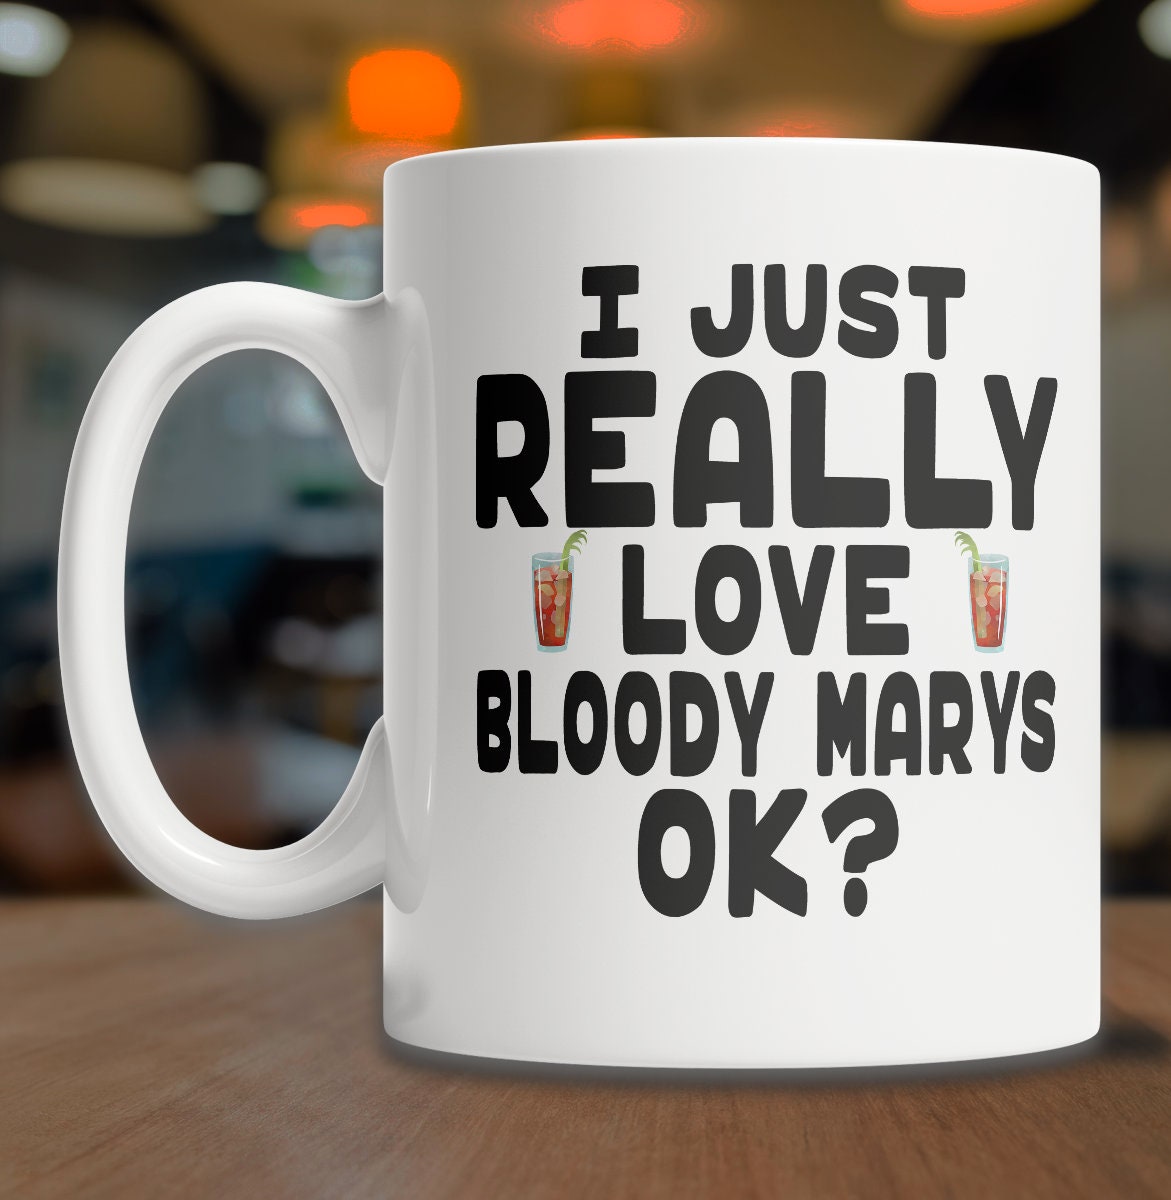 This is Probably Bloody Mary Coffee Mug - Bloody Mary Lover Gift